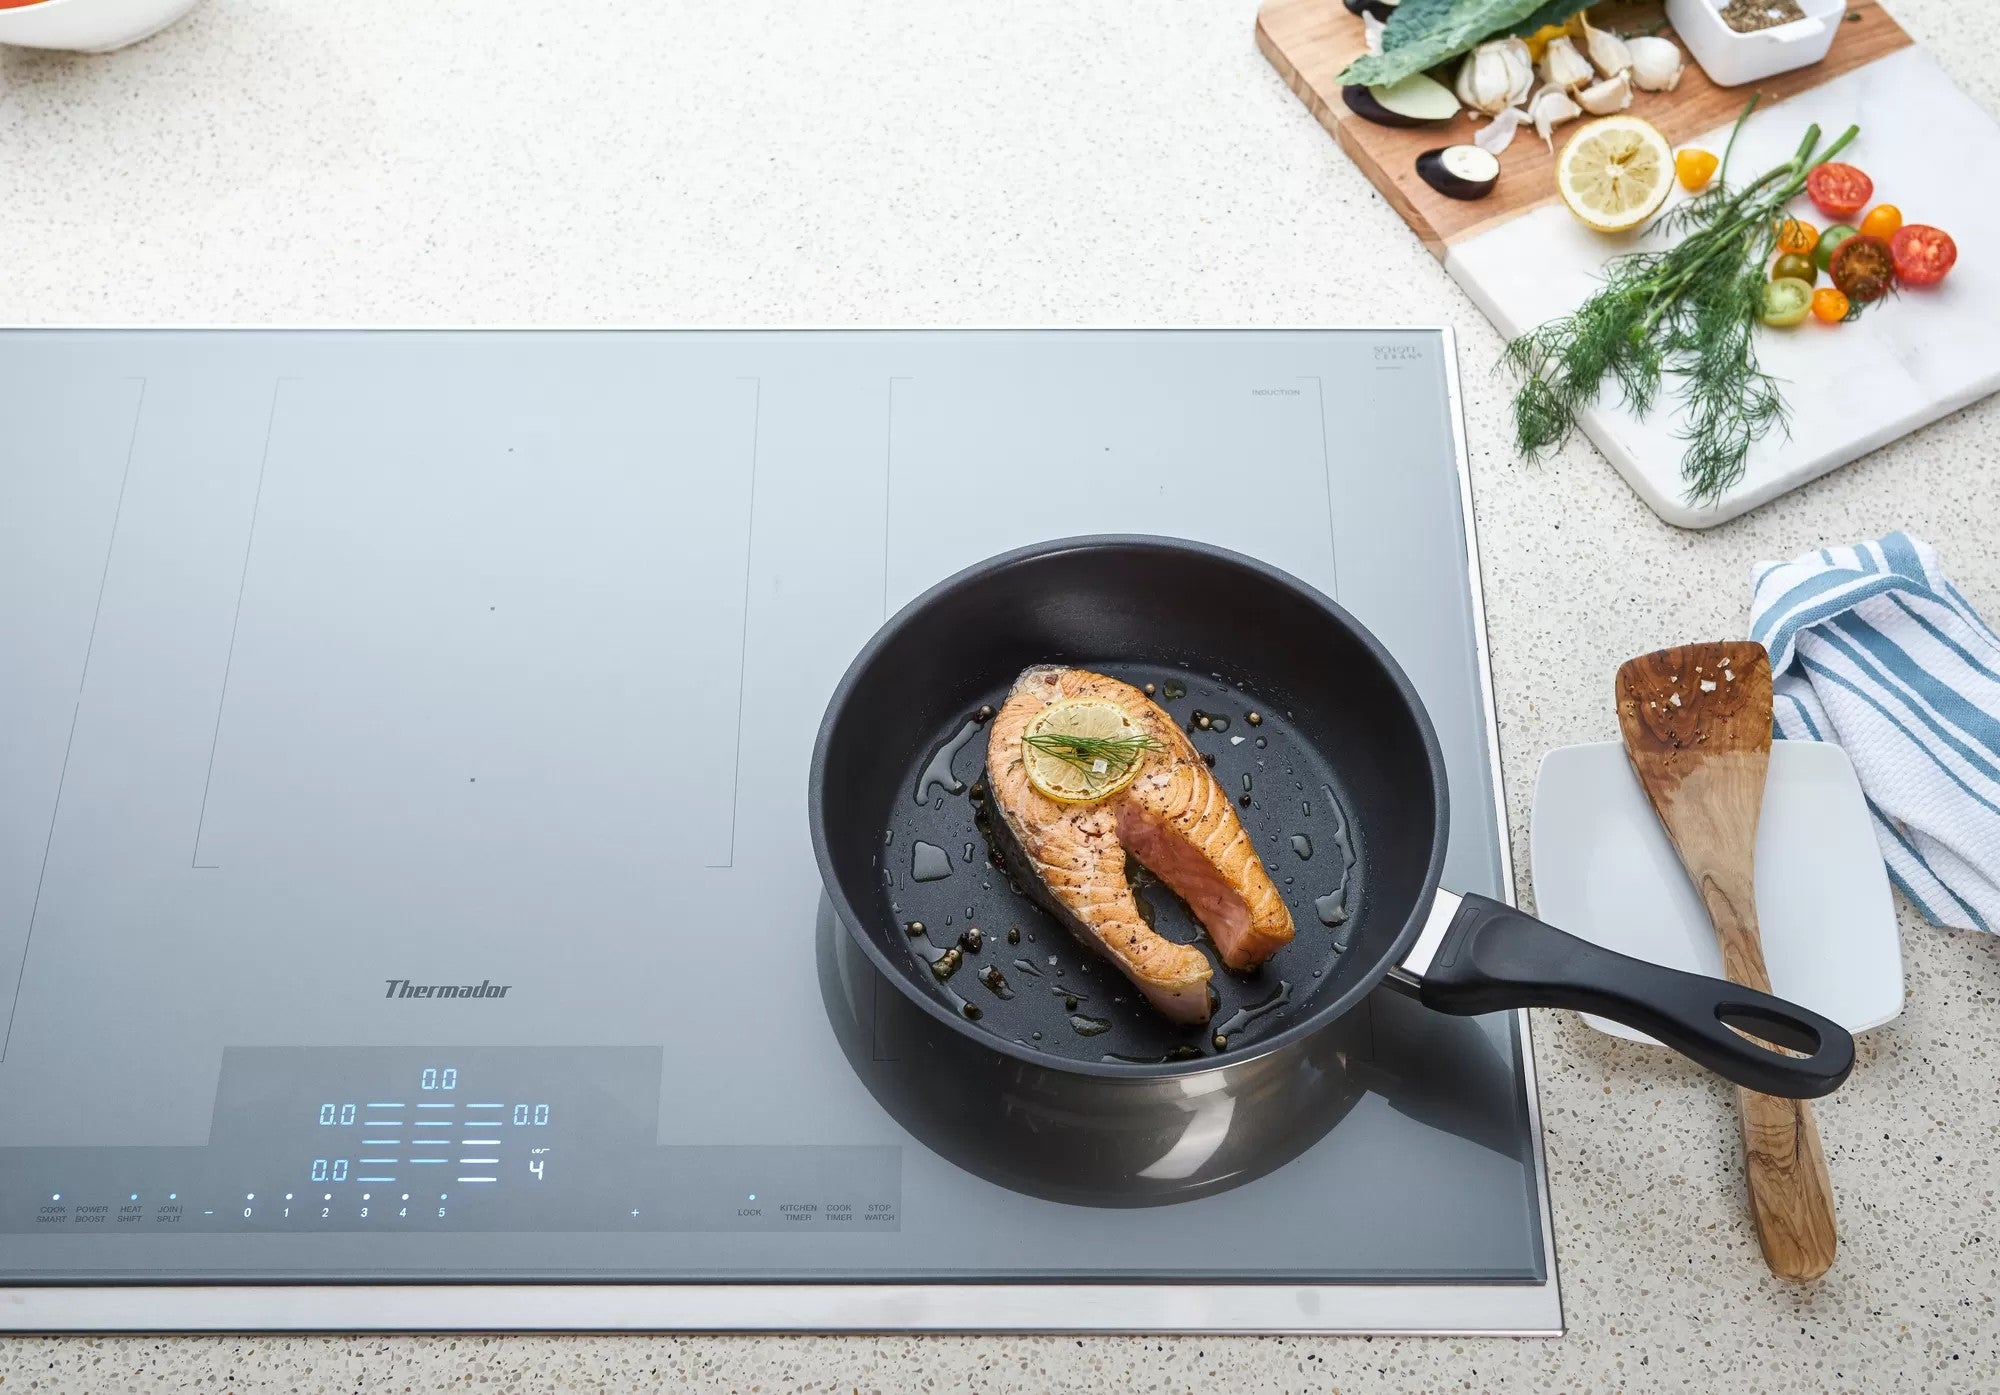 Thermador - 37 Inch Induction Cooktop in Silver - CIT367YMS